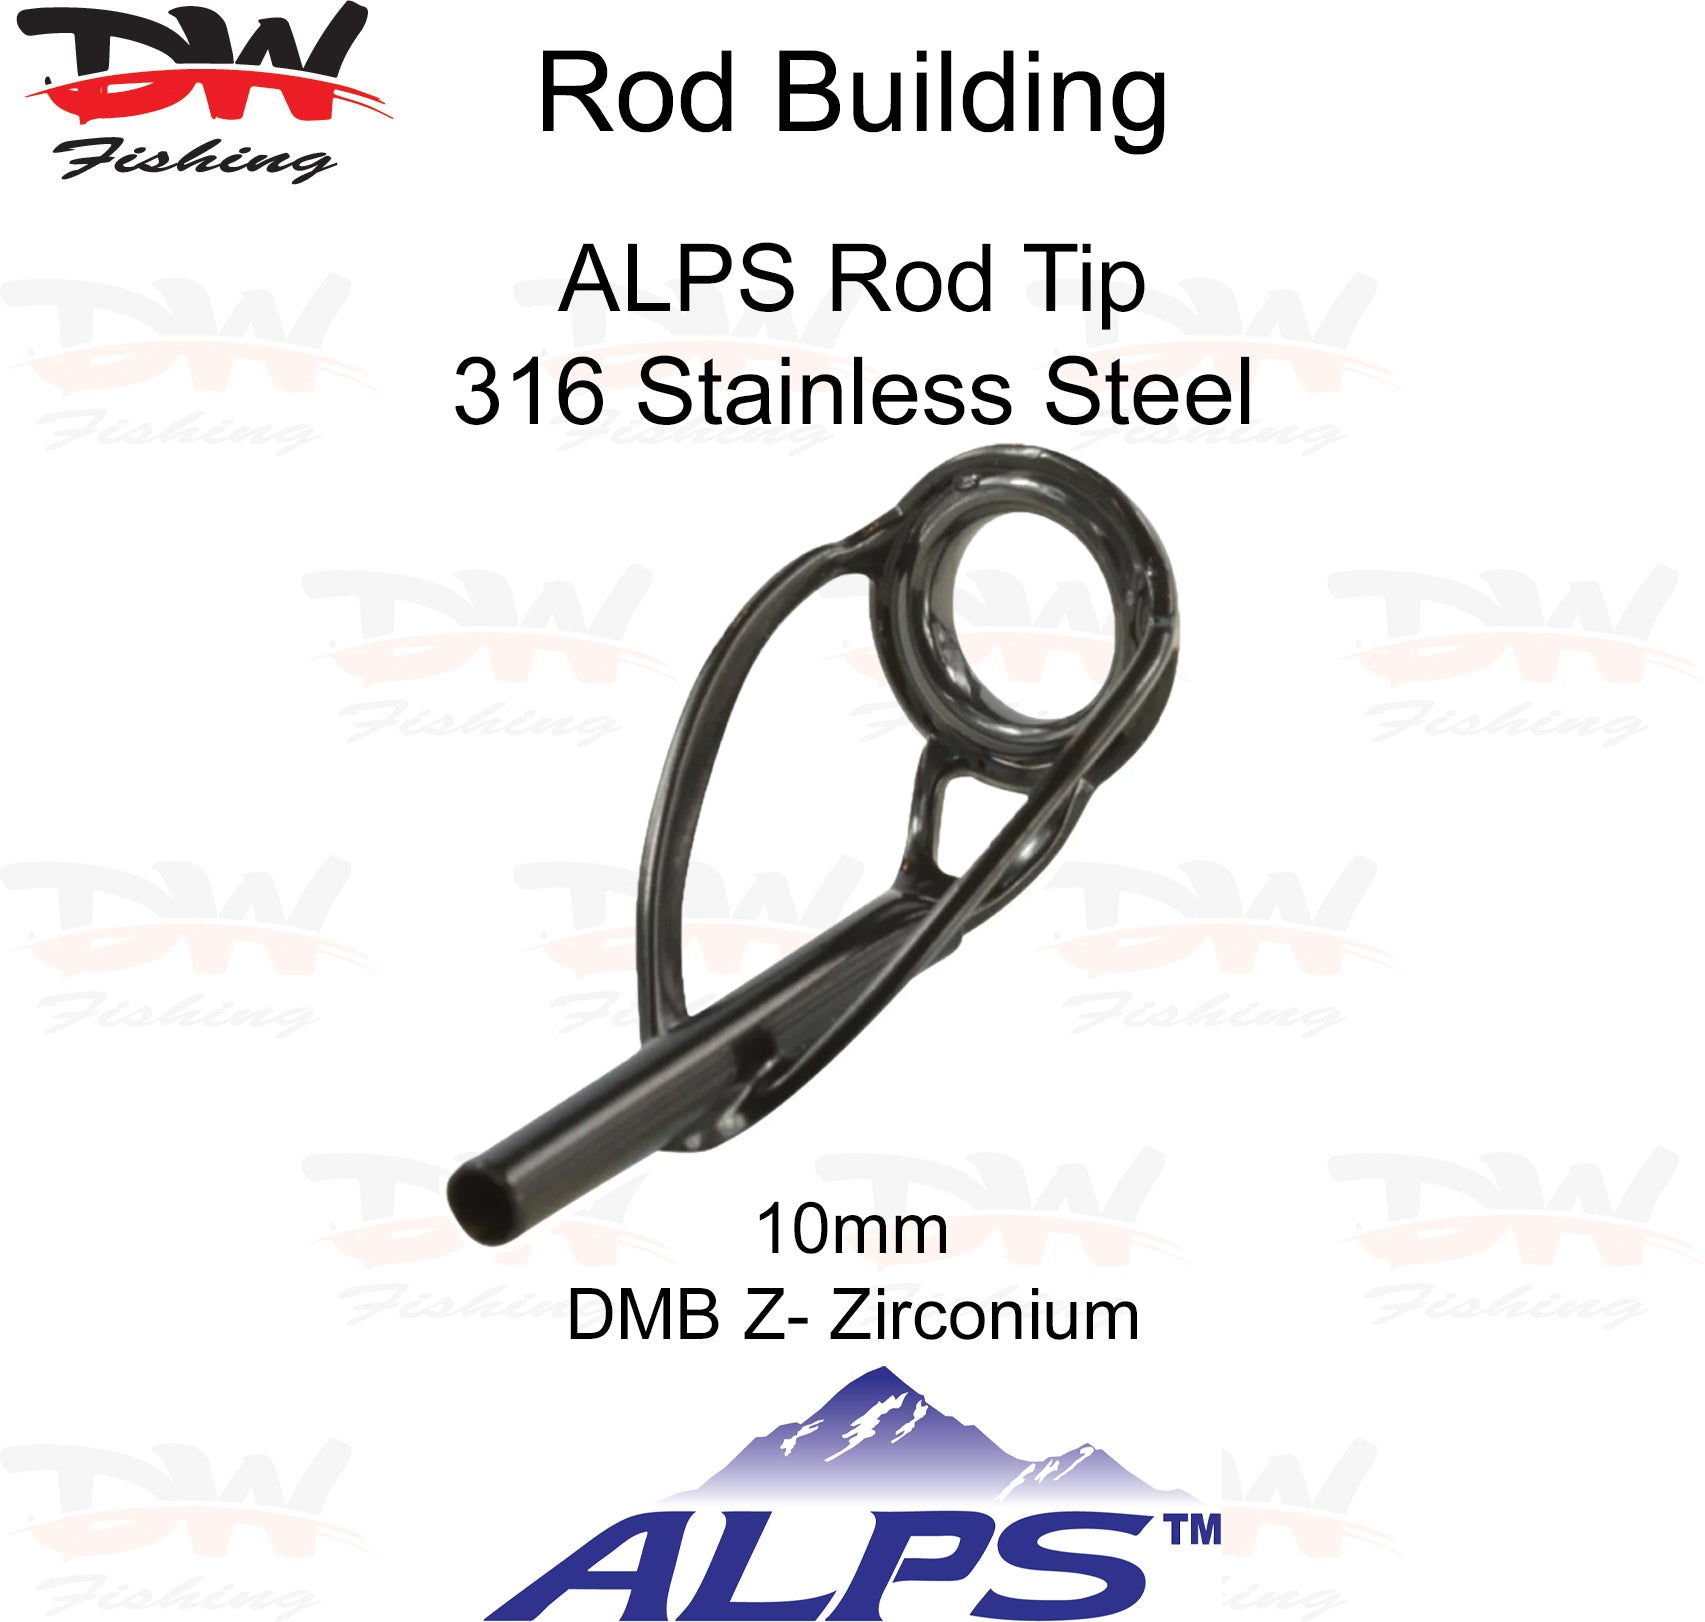 ALPS rod tip DMB-Z Black 316 stainless steel anti tangle frame with black zirconium insert ring, single rod tip picture with 10mm rod tip and logo below